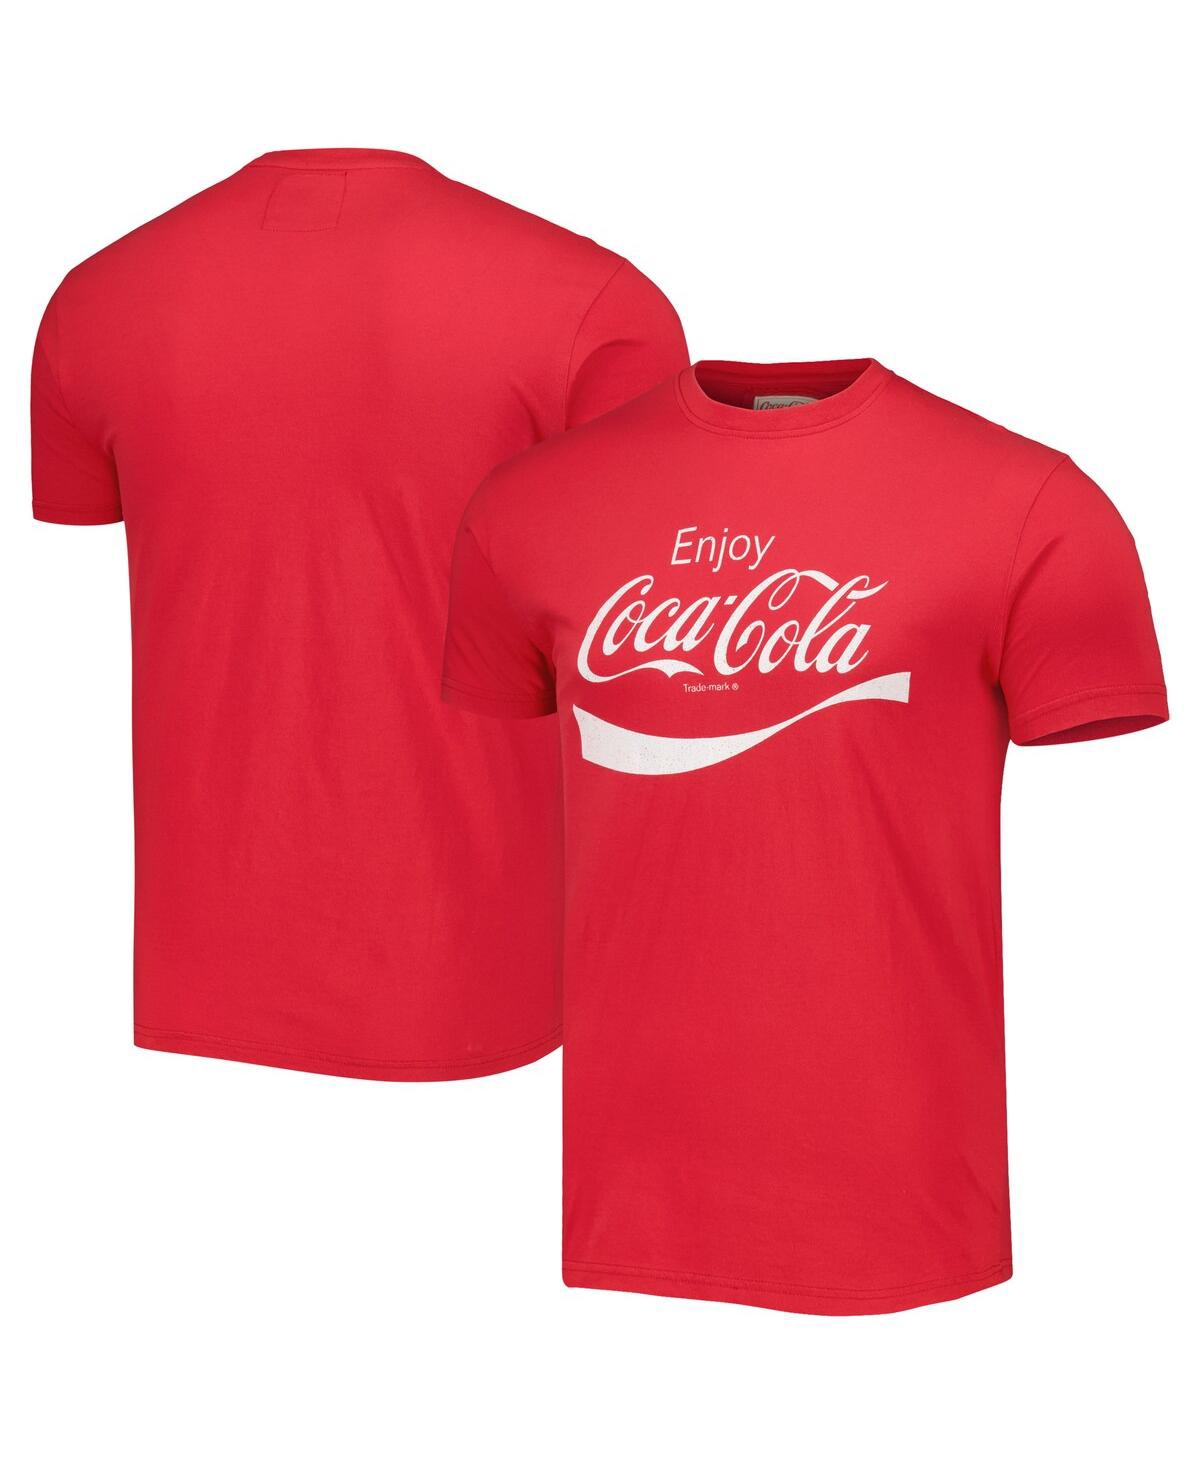 Men's and Women's American Needle Red Distressed Coca-Cola Brass Tacks T-shirt - Red